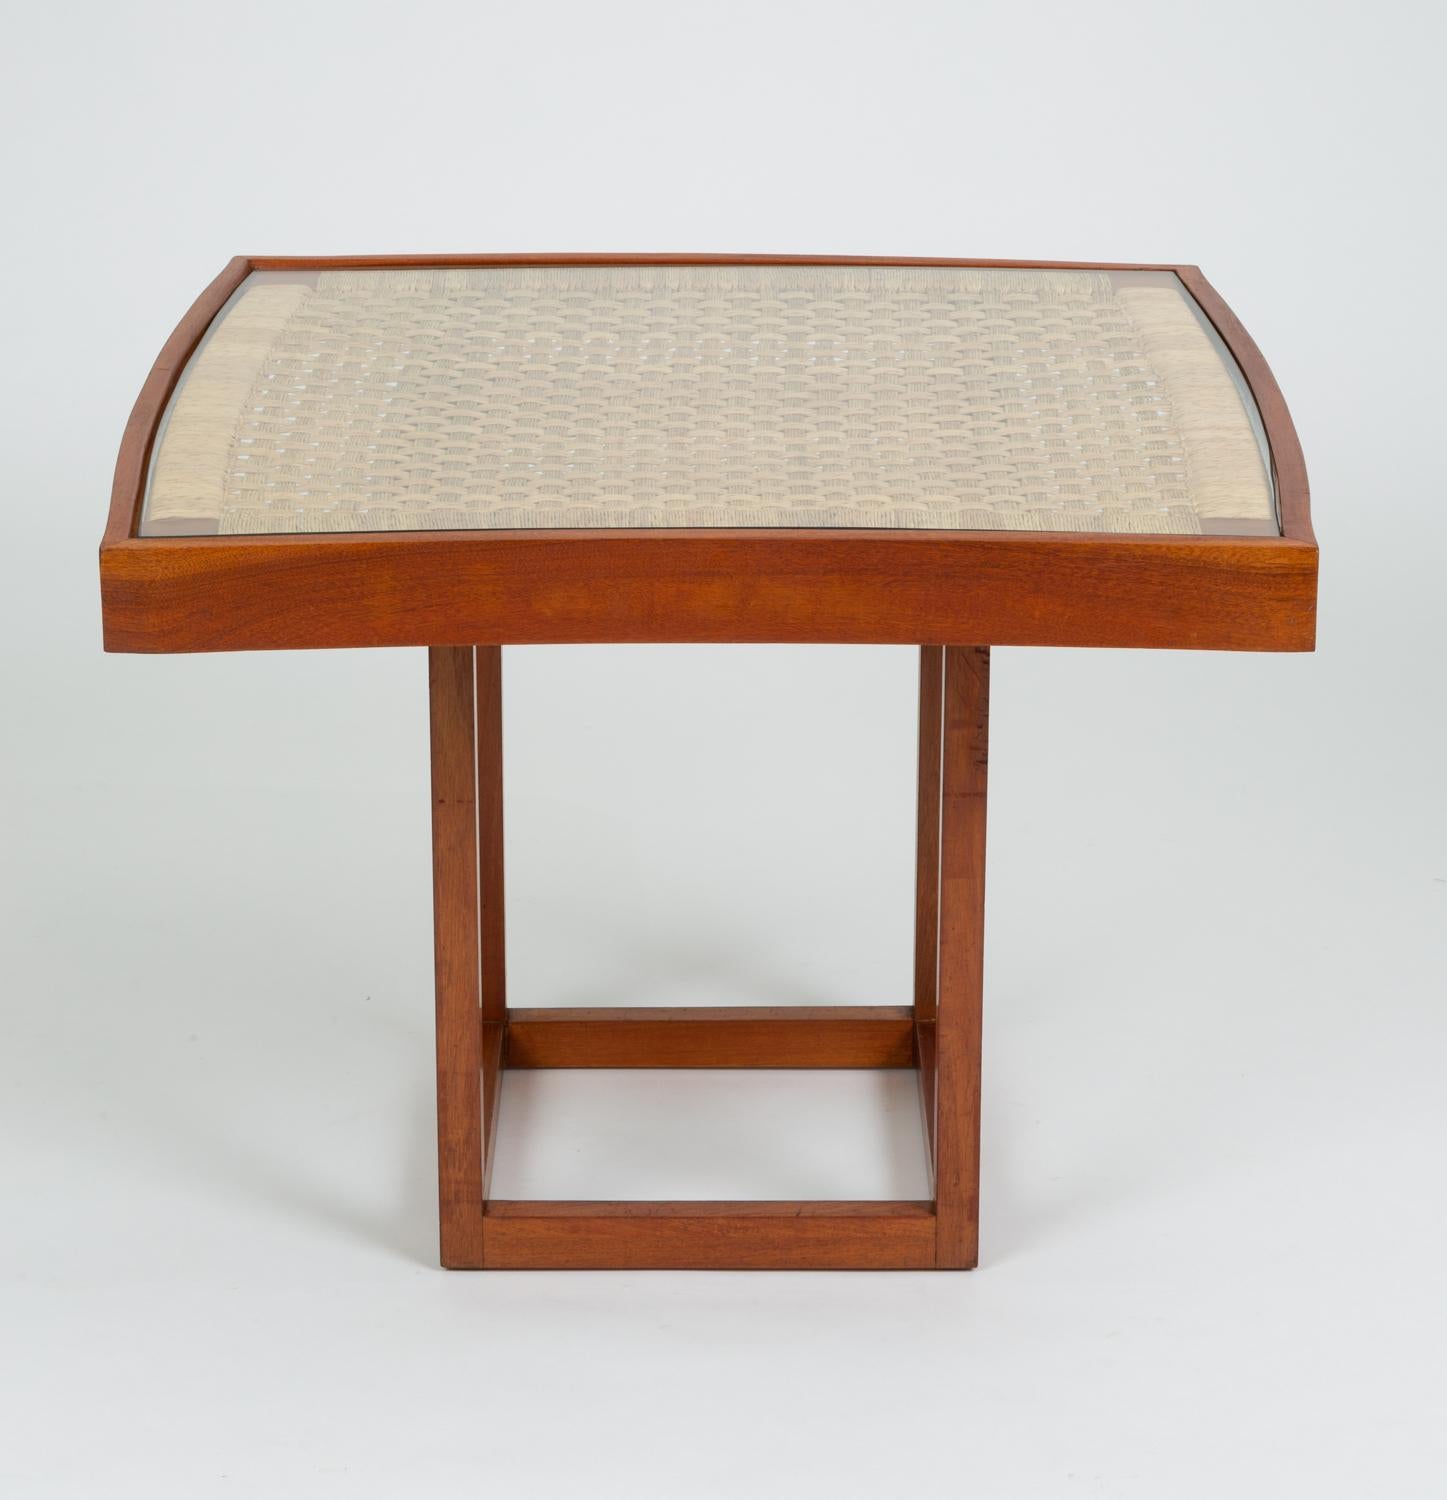 20th Century Convertible Coffee or Dining Table by Michael van Beuren for Domus Mexico